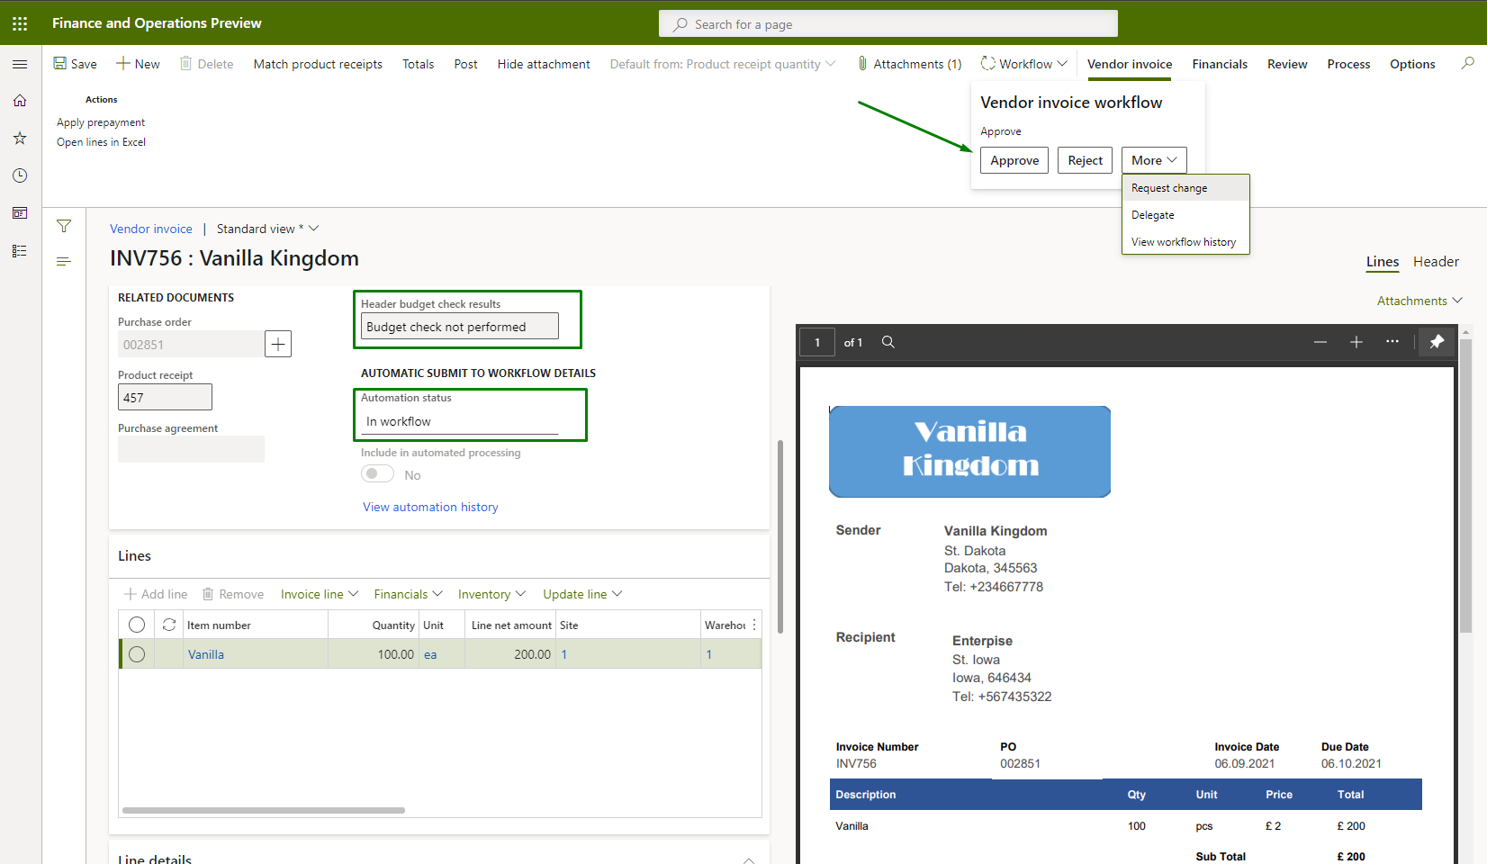 Vendor invoice automation_Pic. 10 – Vendor invoice side by side view (approval)